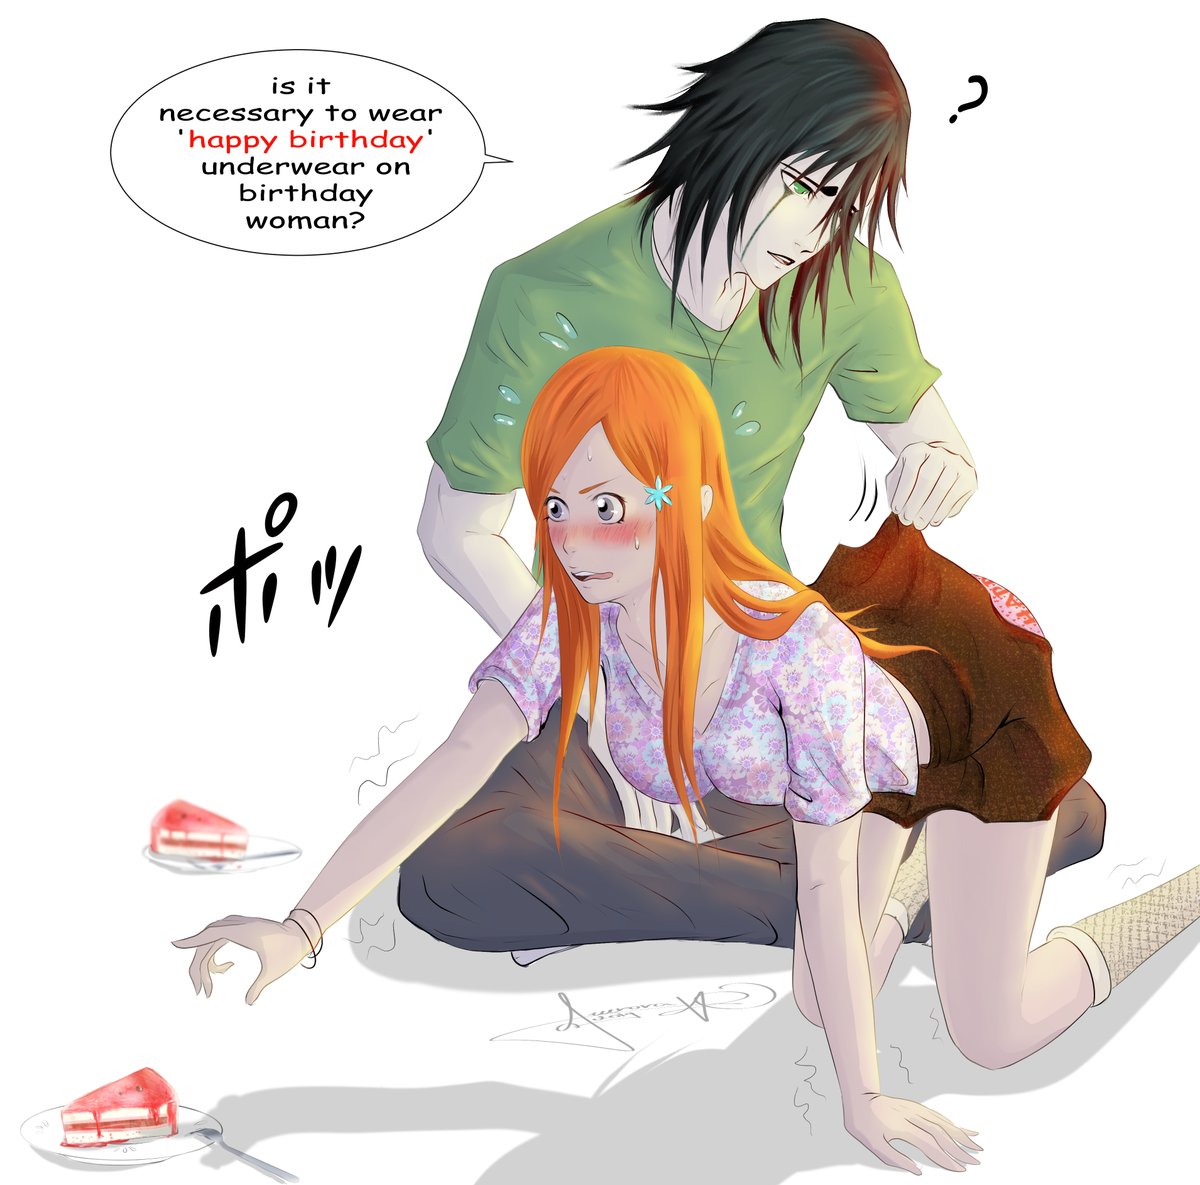 Aurora Archangel I Just See Her Throwing That Plate At Him Xdd Fanart Anime Manga 井上織姫 ウルキオラ シファー Bleach Orihime Ulquiorra Ulquihime Drawing T Co 0inrghv7yn